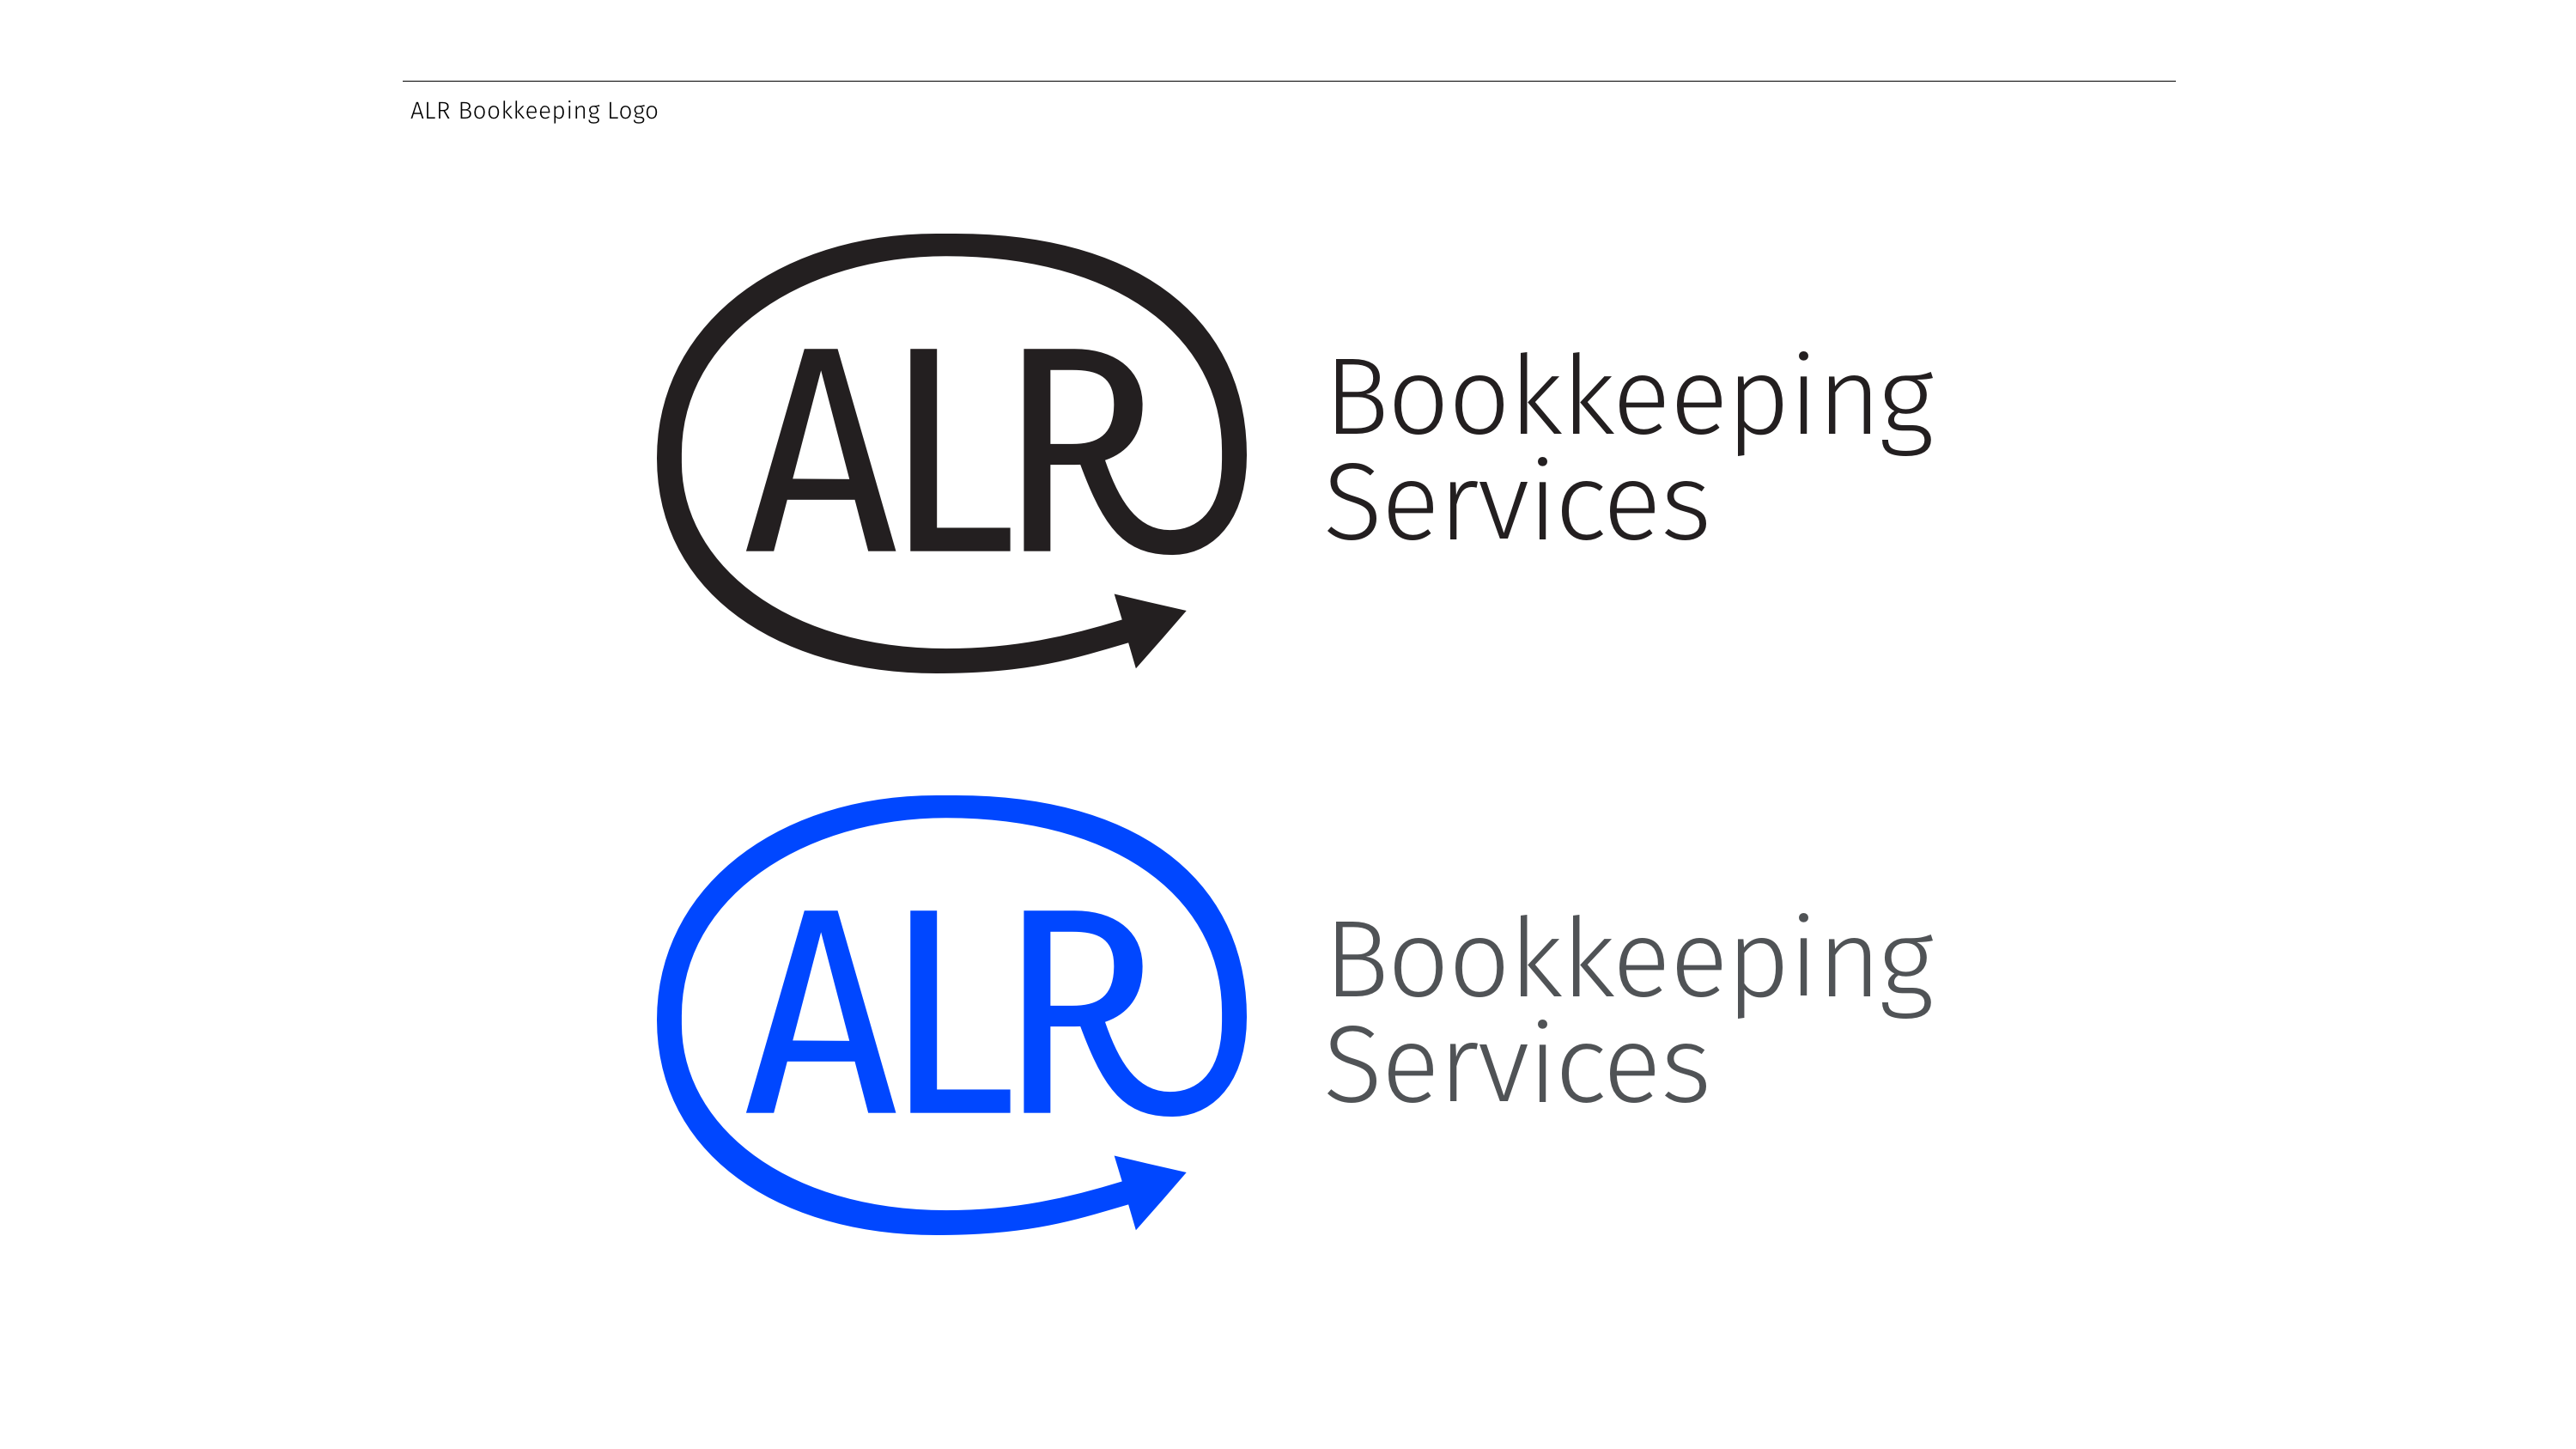 The logo for ALR Bookkeeping displayed in black and white (top) and colour (bottom)